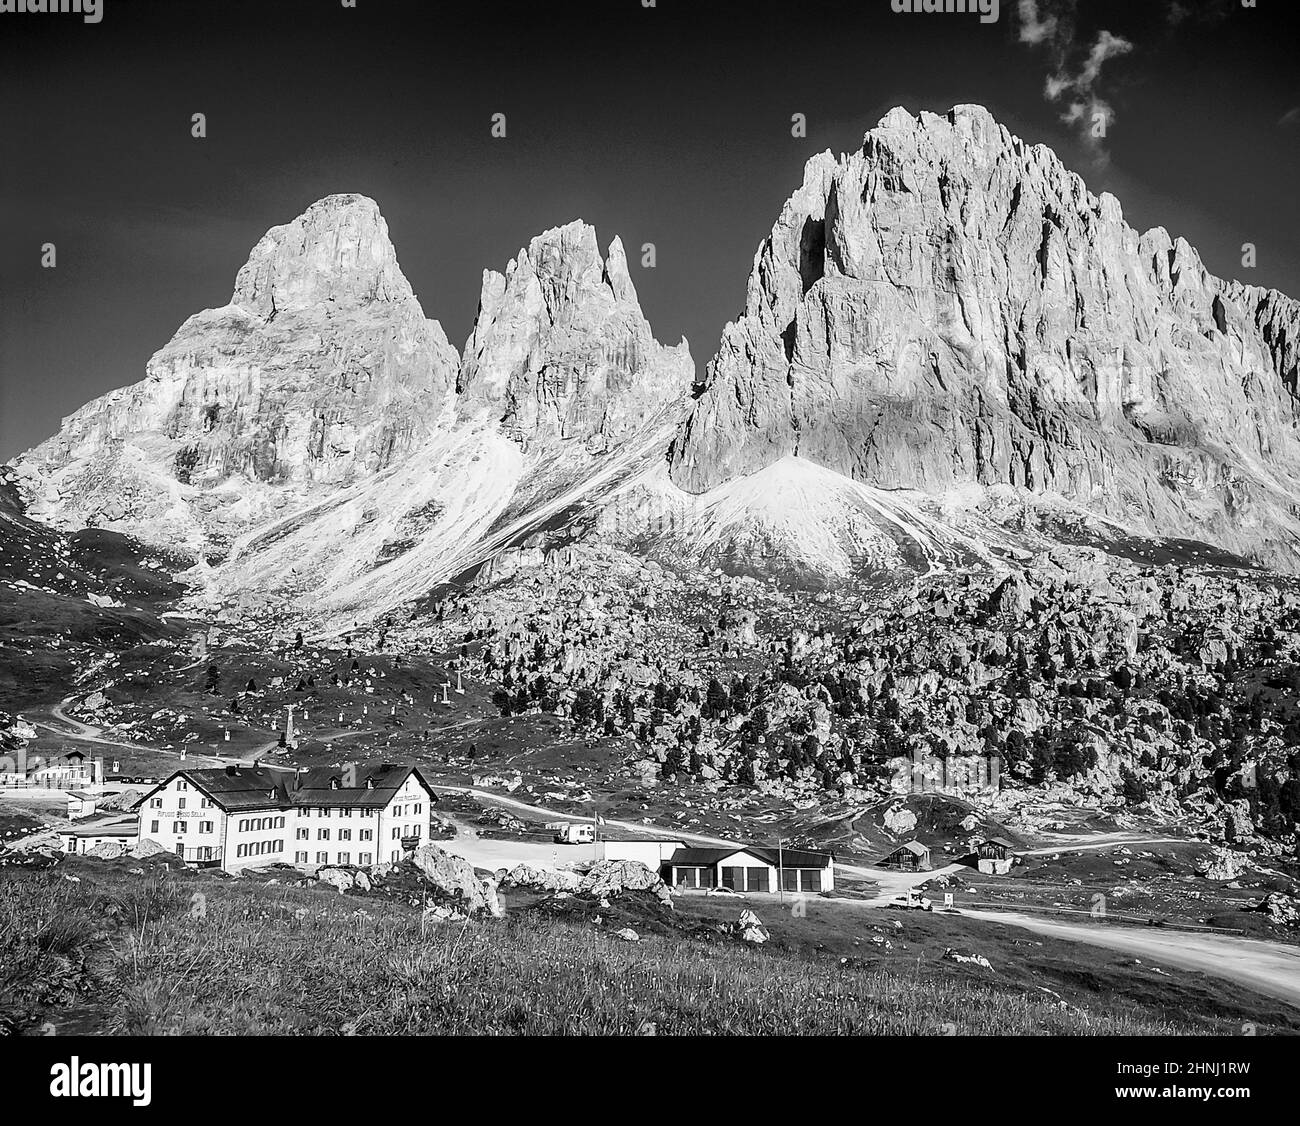 These are the dramatic three peaks of Langkofel from Sella Joch-Pass in the South Tirol of the Italian Dolomites in the Alto Adige, from left Grohmann Spitze, Funf Finger Spitze, Langkofel Stock Photo